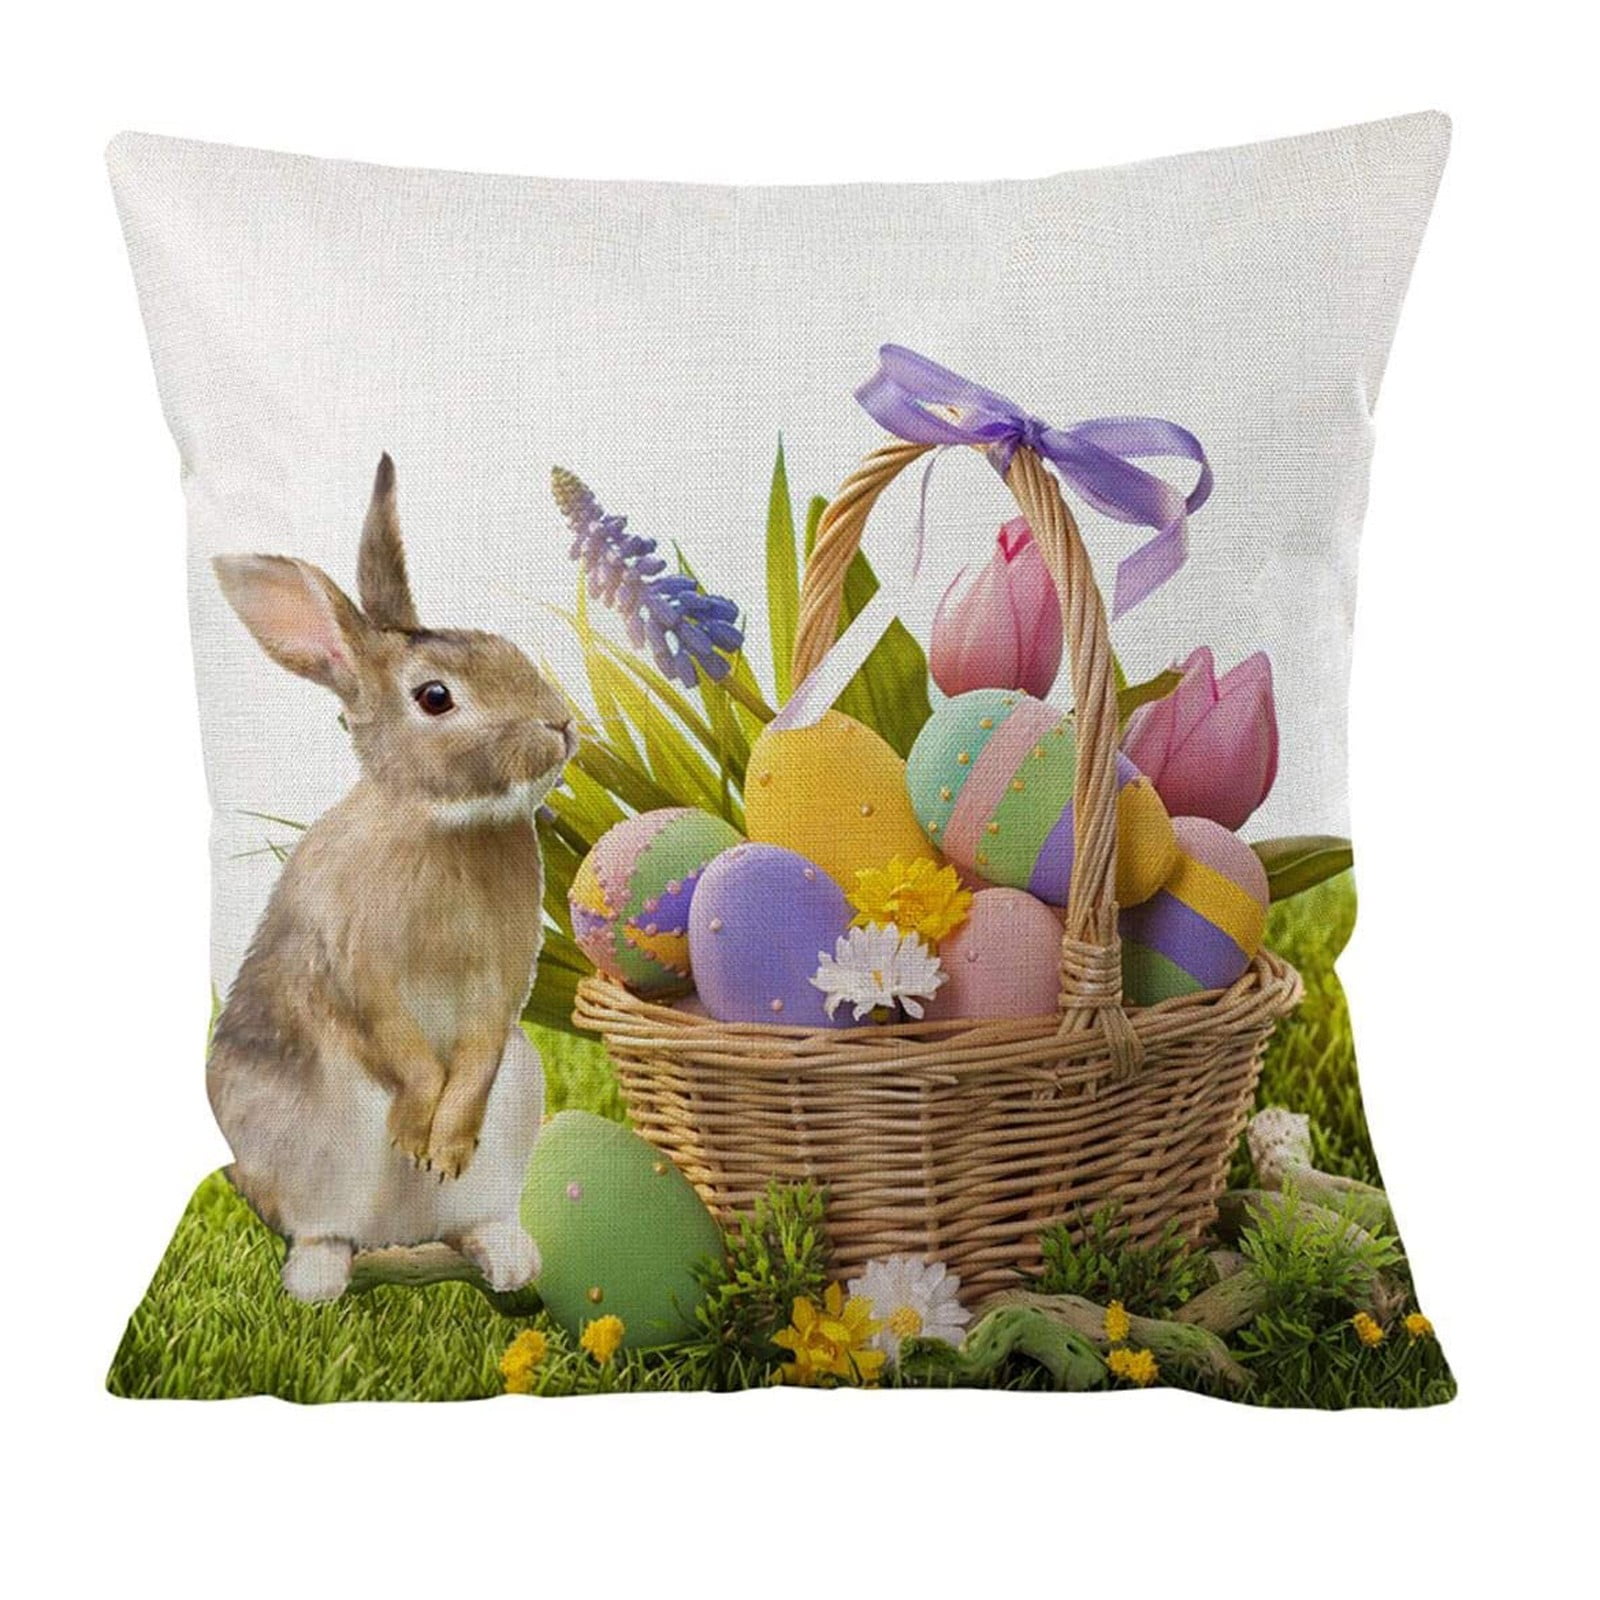 Spring Easter Bunny Flower Truck Egg Pillow Case Couch Cushion Cover Home Decor 